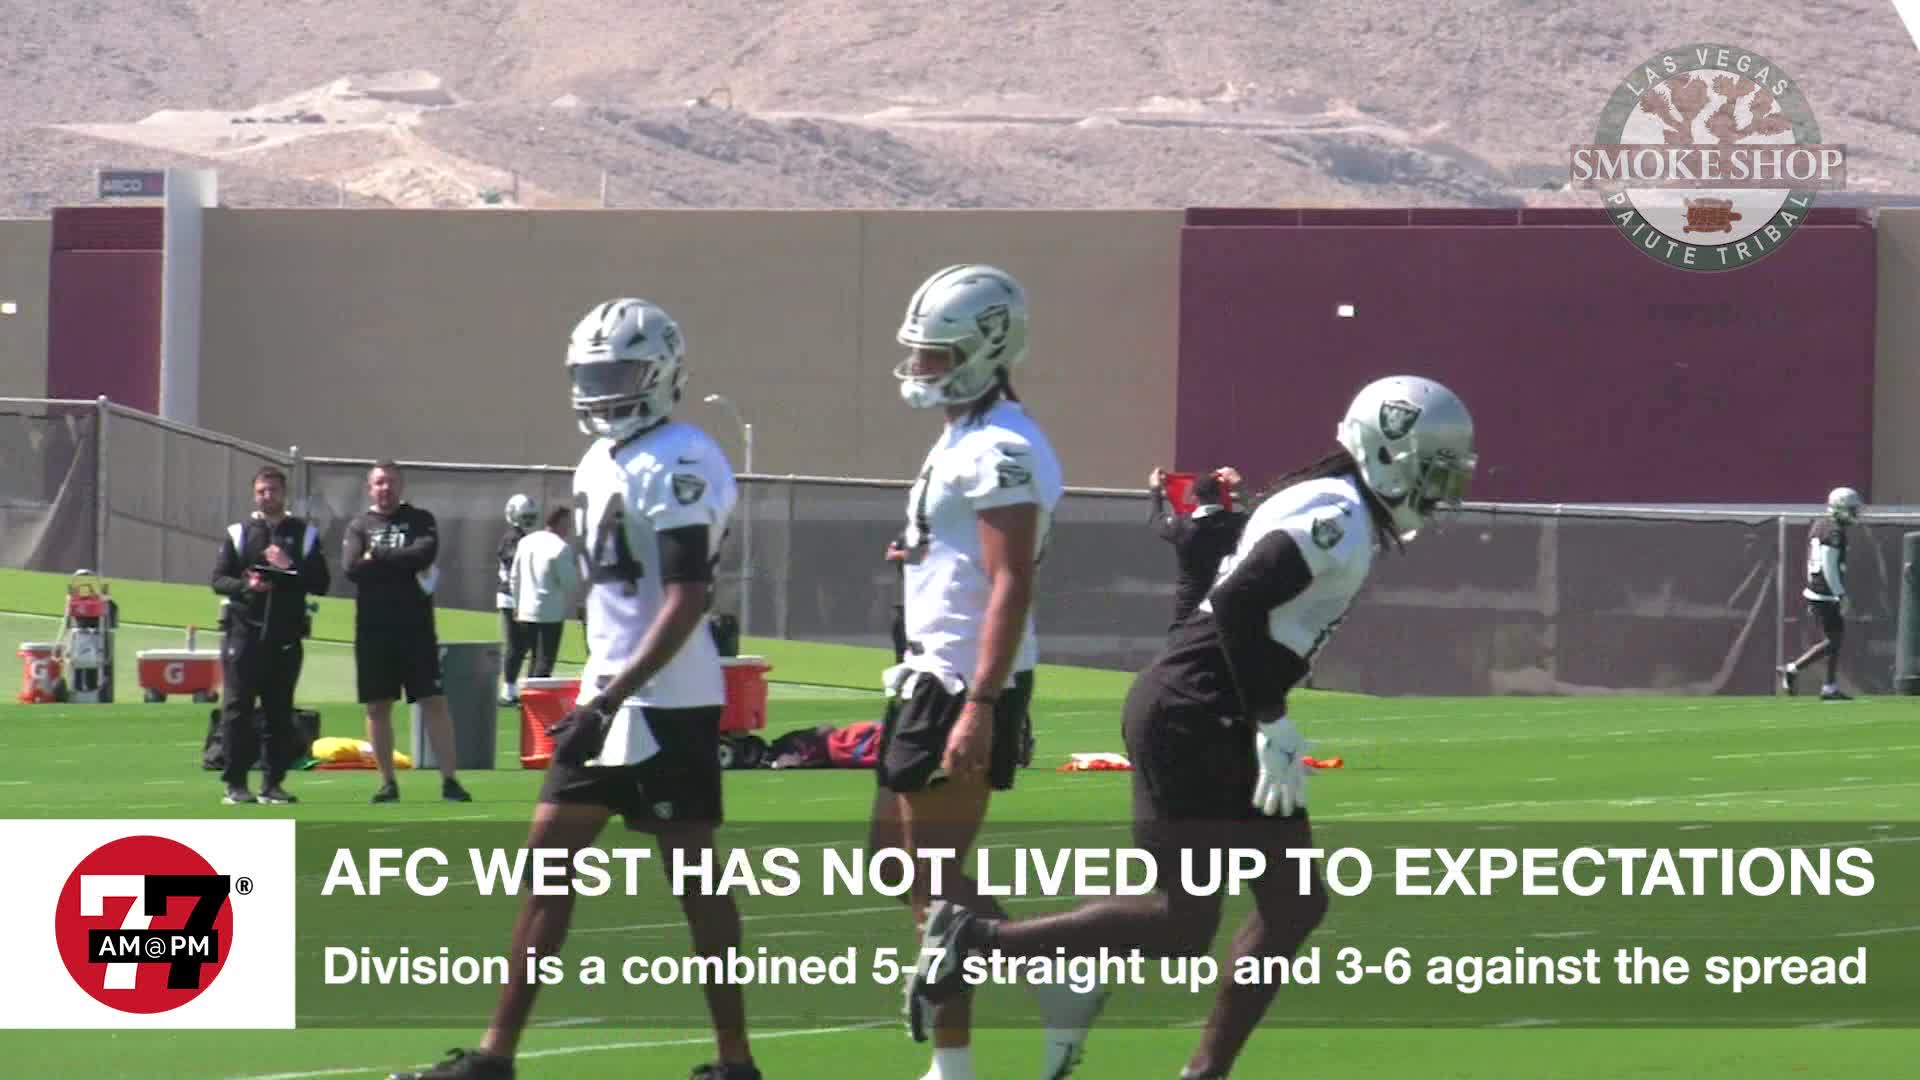 Is AFC West overrated?